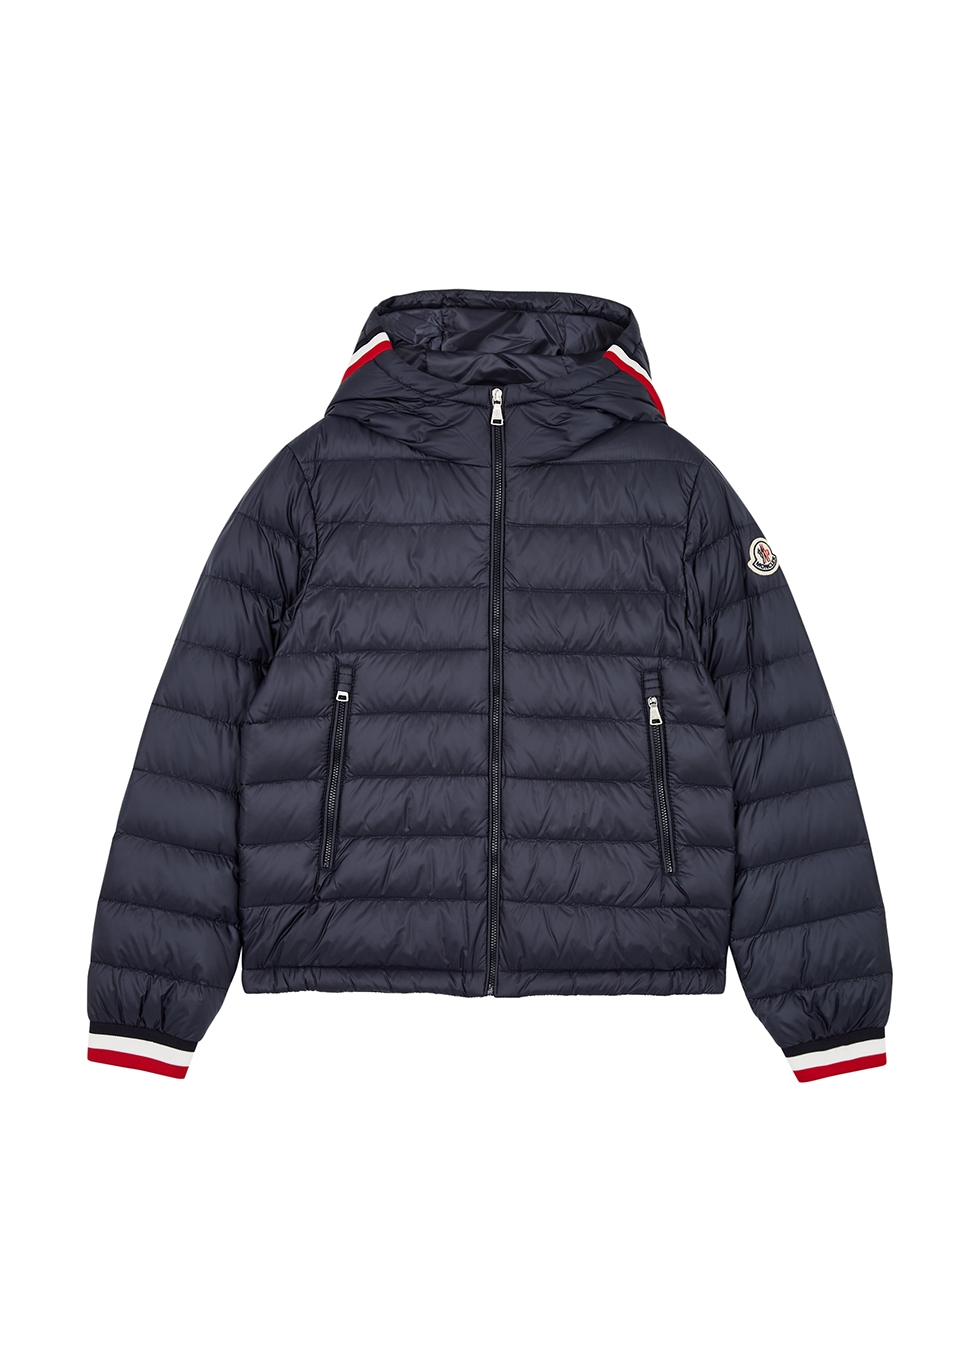 Moncler KIDS Giroux navy quilted shell jacket (12-14 years) first ...